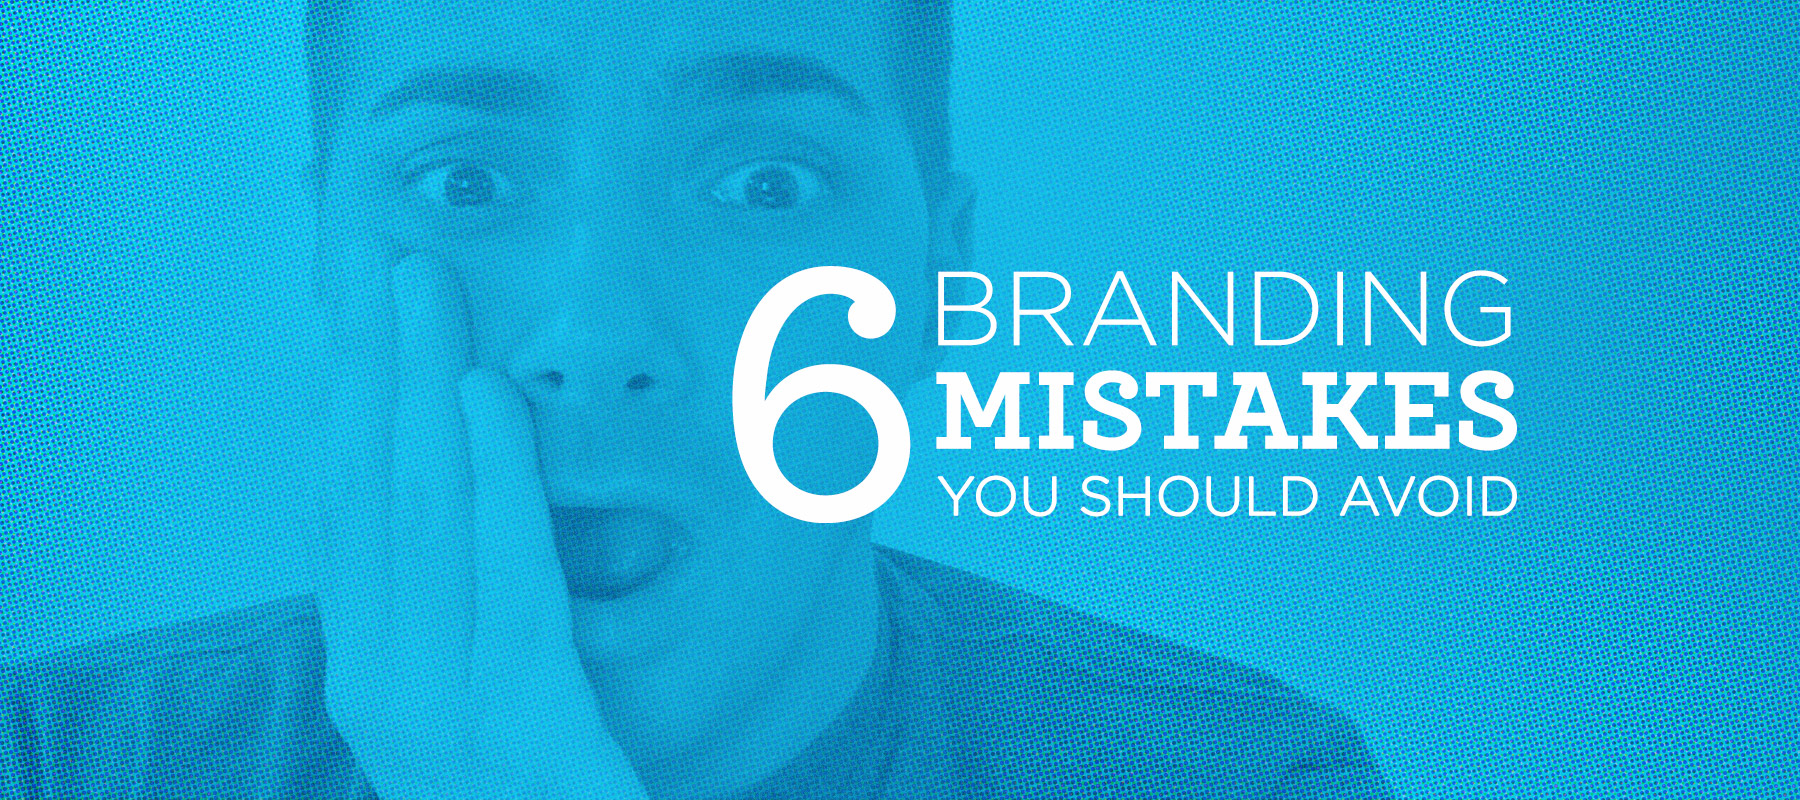 6 Branding Mistakes You Should Avoid